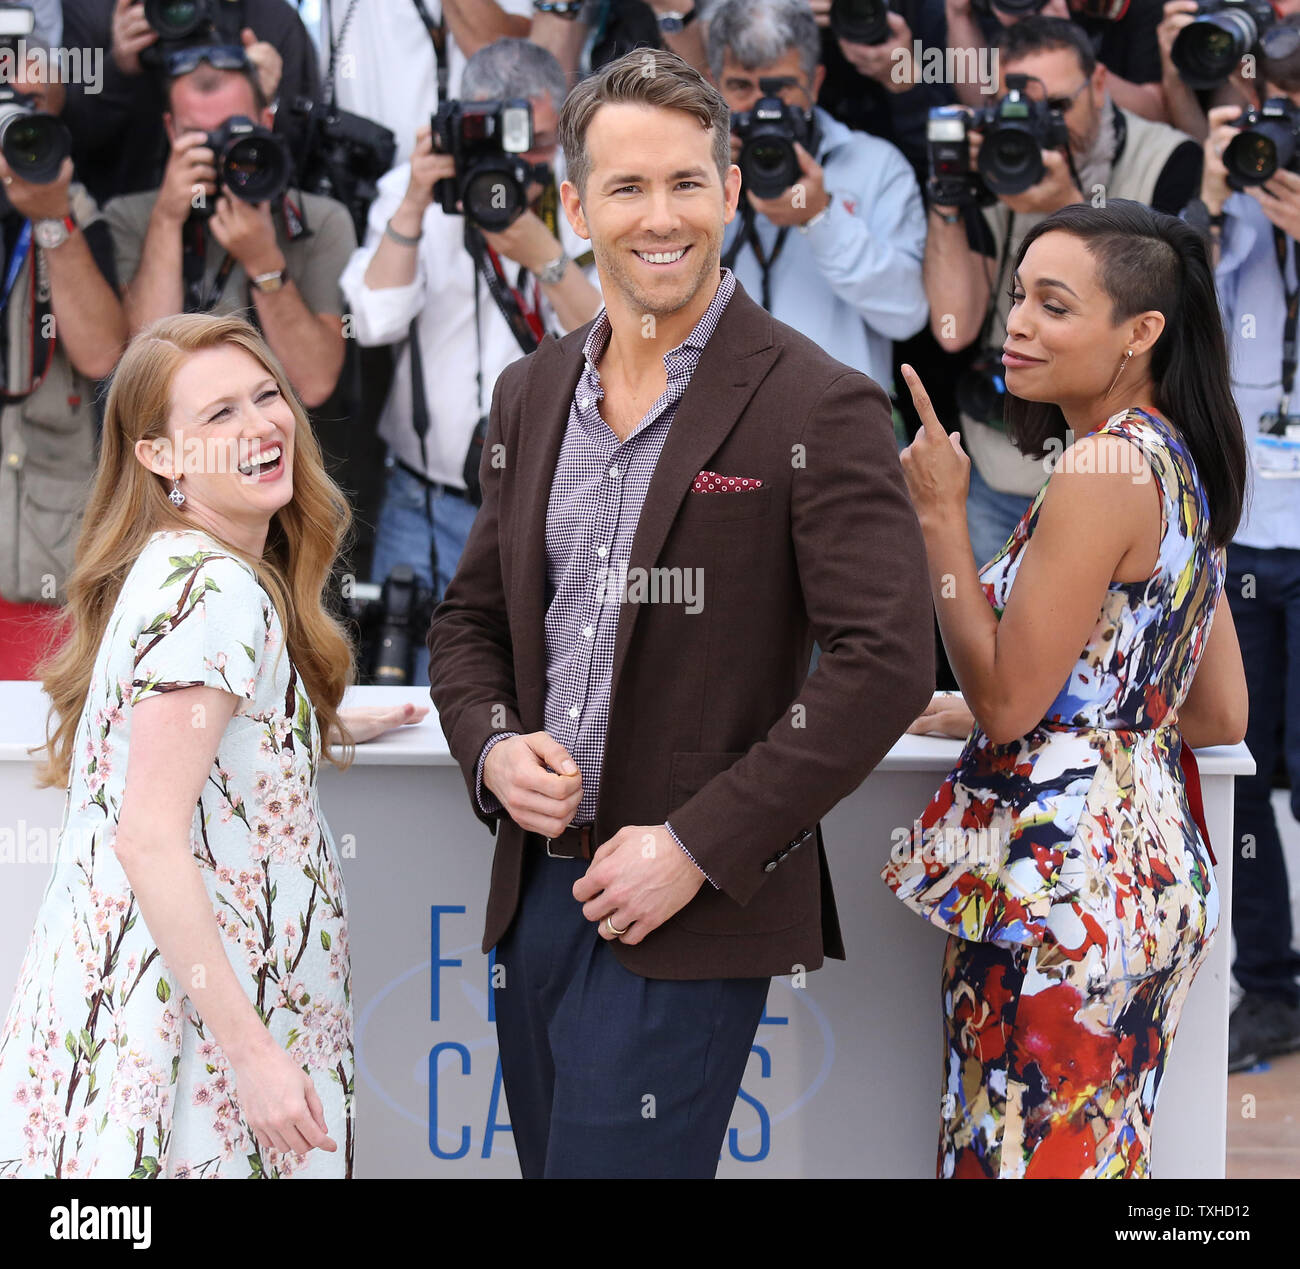 https://c8.alamy.com/comp/TXHD12/mireille-enos-l-ryan-reynolds-c-and-rosario-dawson-arrive-at-a-photo-call-for-the-film-captives-during-the-67th-annual-cannes-international-film-festival-in-cannes-france-on-may-16-2014-upidavid-silpa-TXHD12.jpg